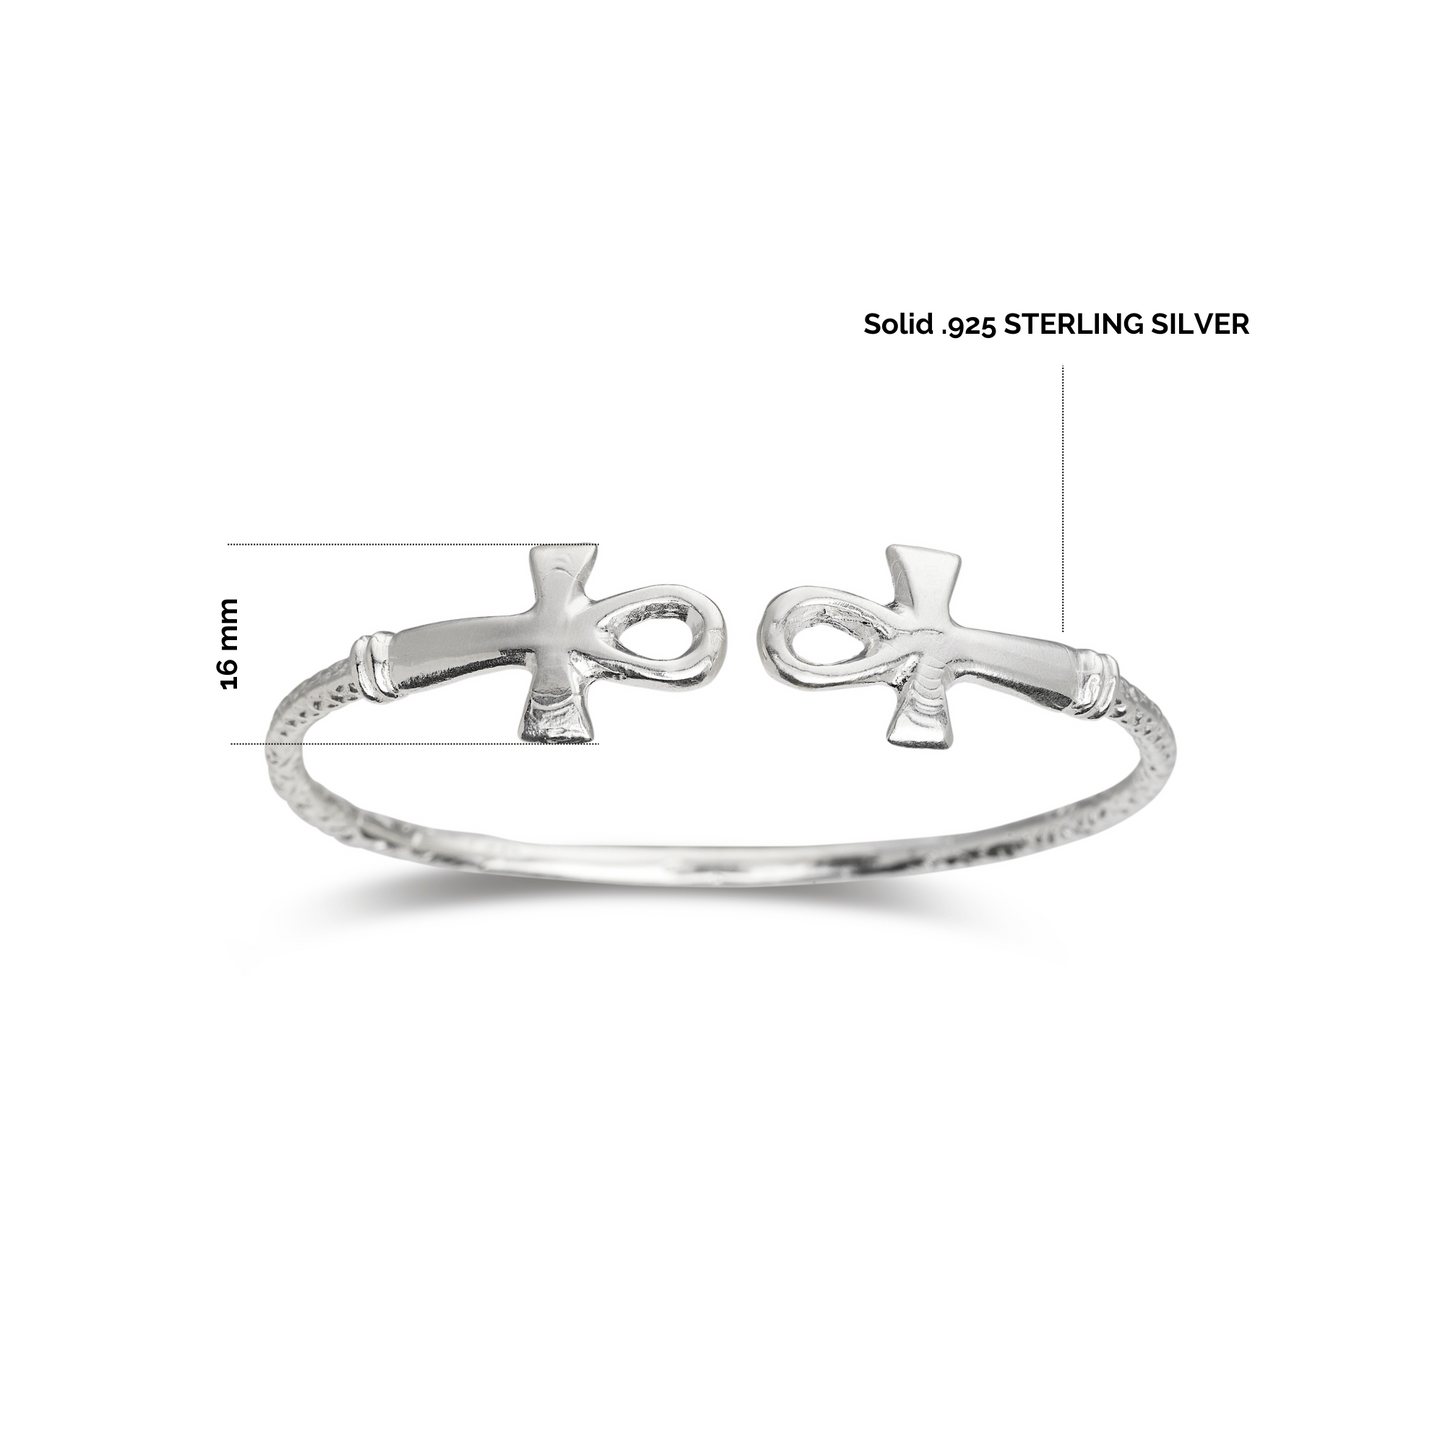 Better Jewelry Solid .925 West Indian Silver Bangles with Ankh Cross Ends, 1 pair